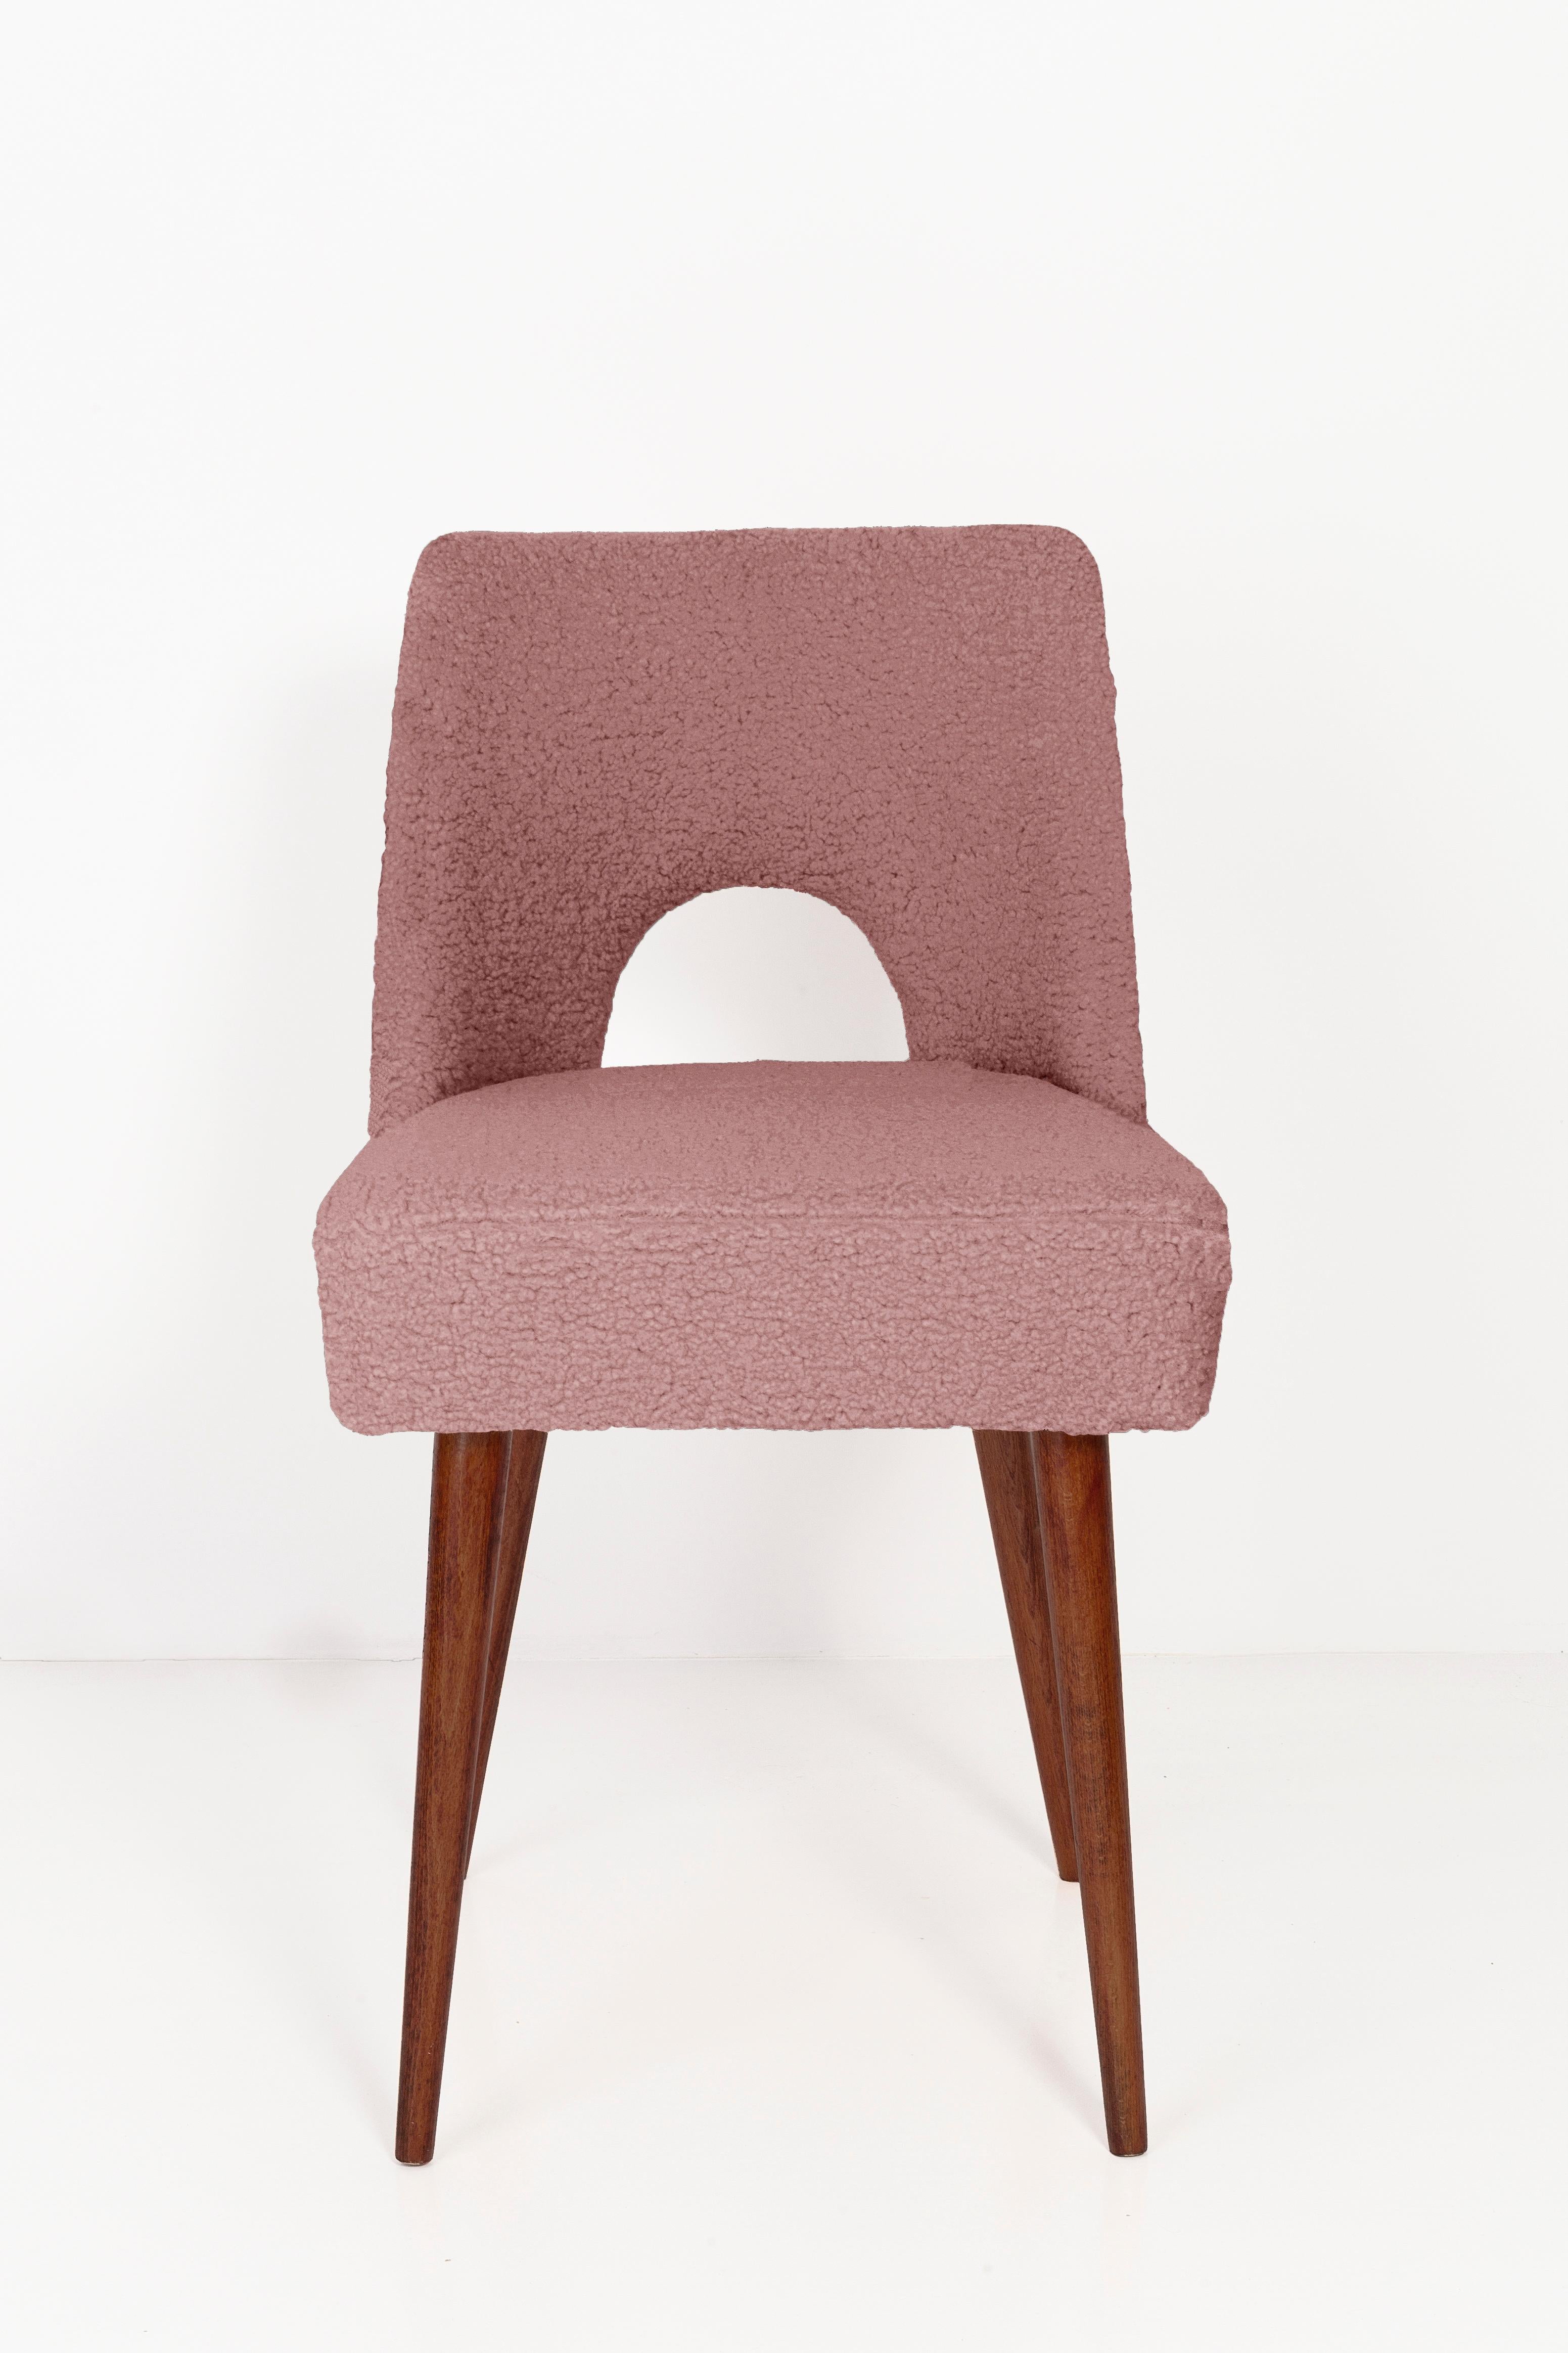 Polish Set of Twelve Pink Boucle 'Shell' Chairs, 1960s For Sale